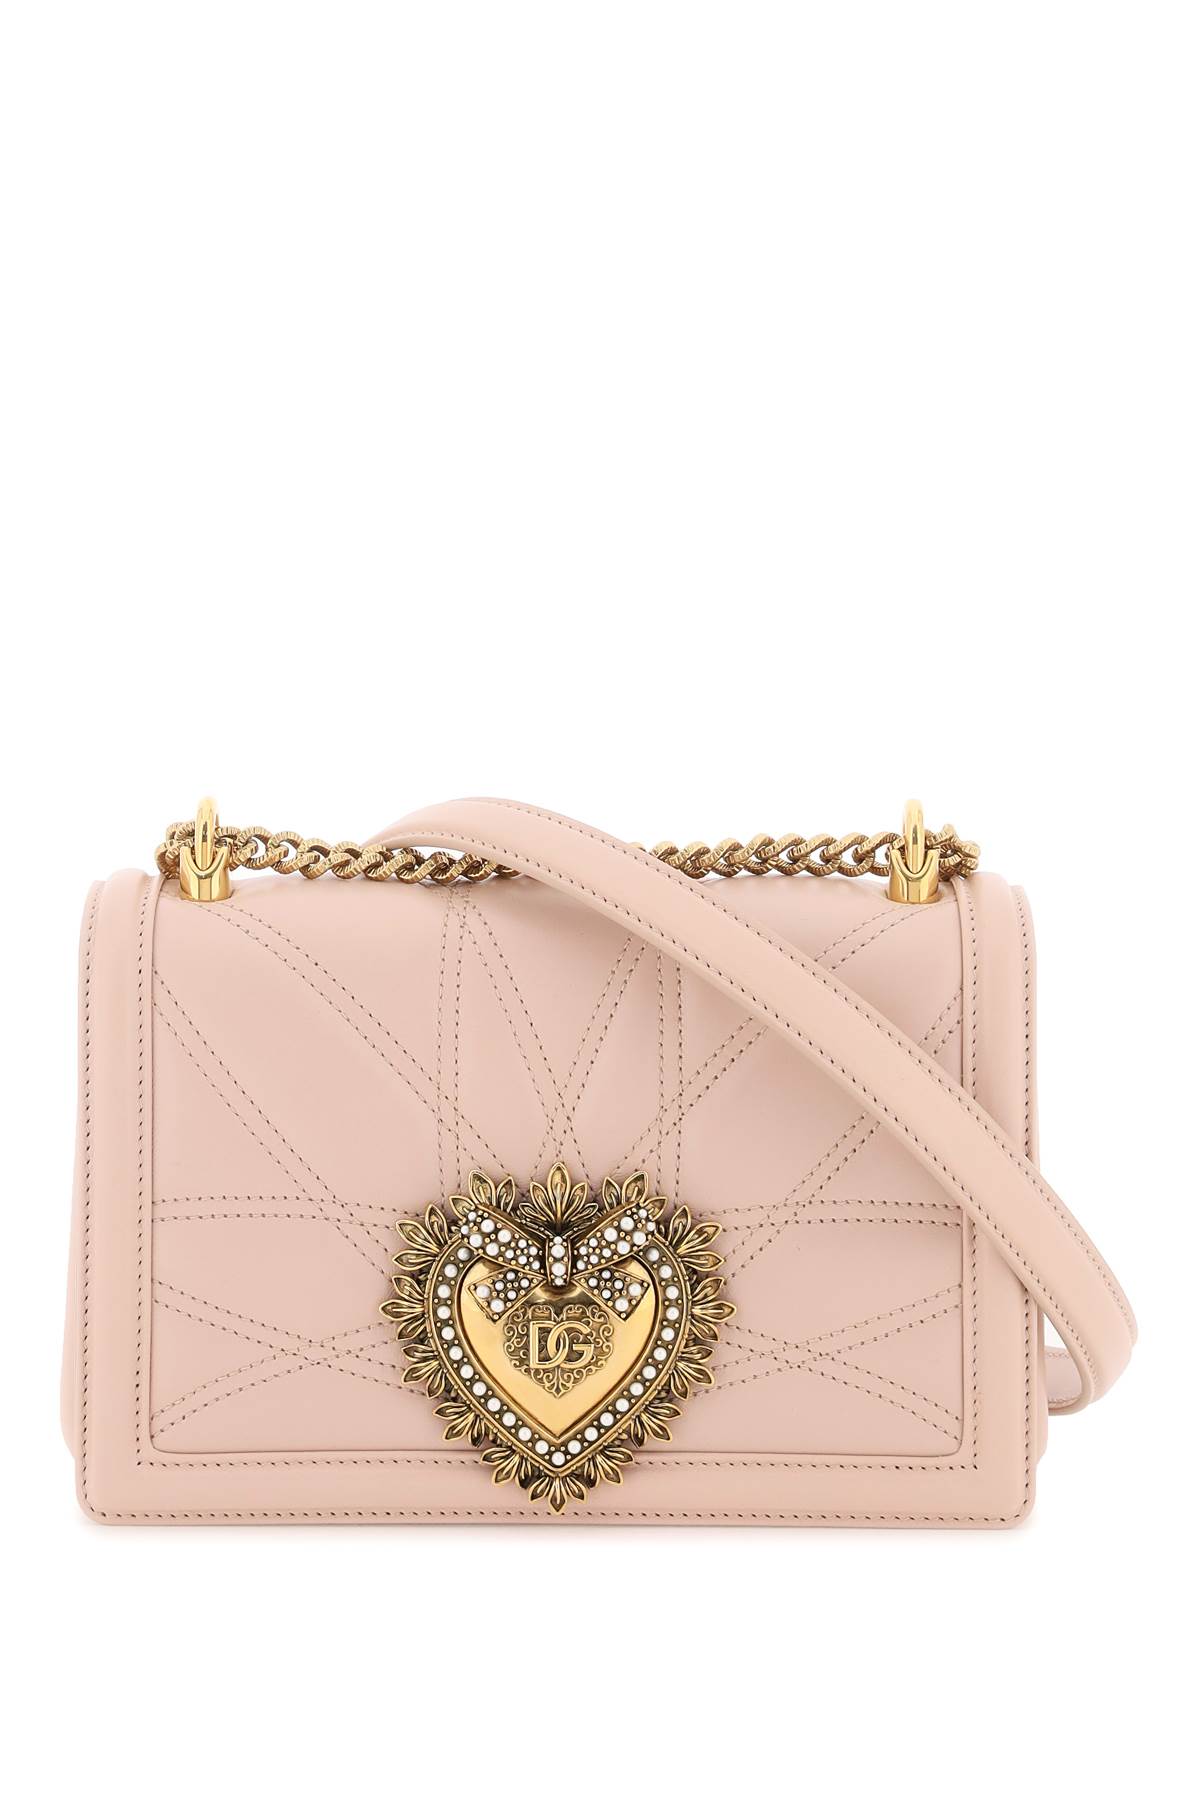 DOLCE & GABBANA MEDIUM DEVOTION BAG IN QUILTED NAPPA LEATHER